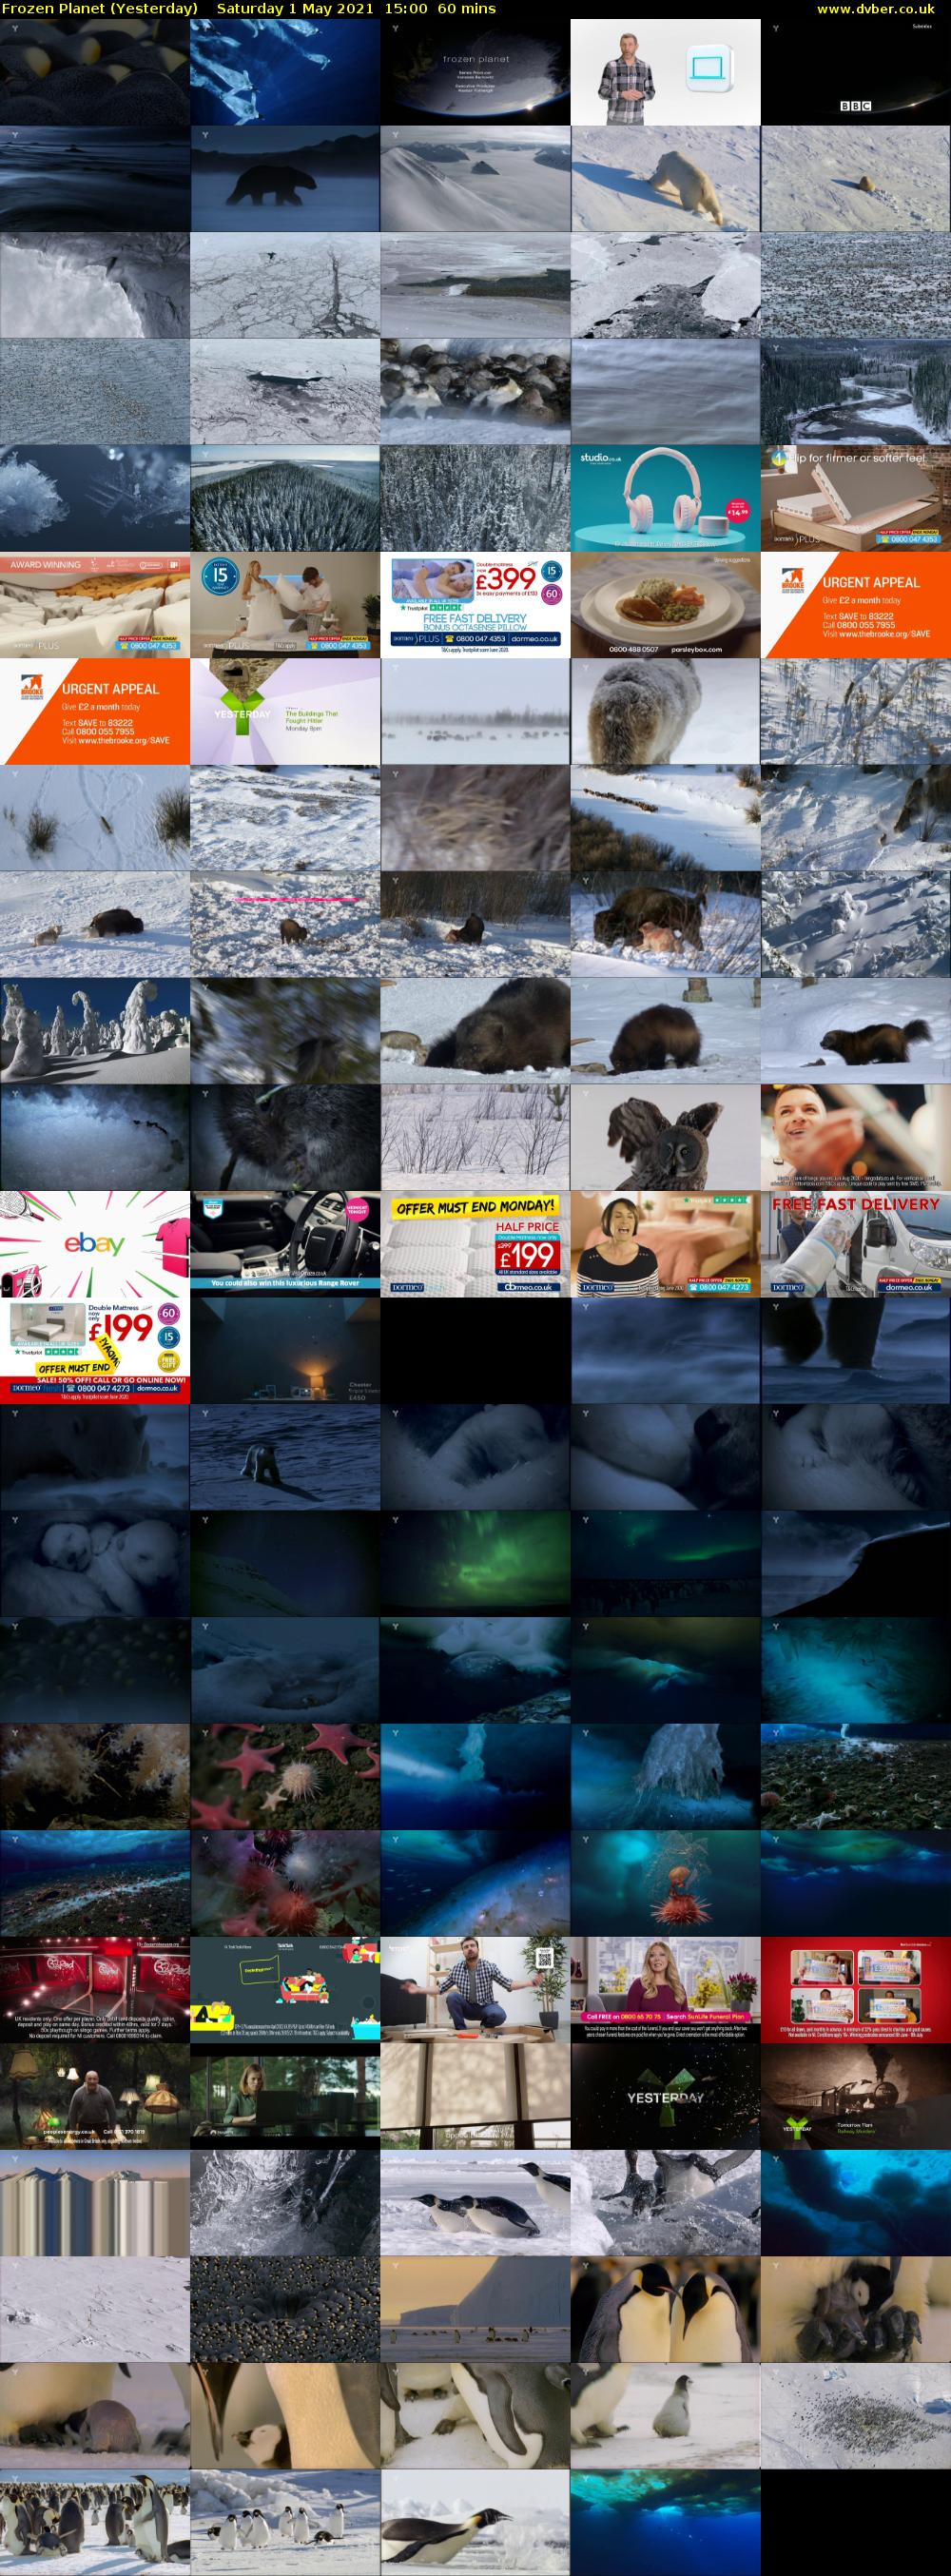 Frozen Planet (Yesterday) Saturday 1 May 2021 15:00 - 16:00